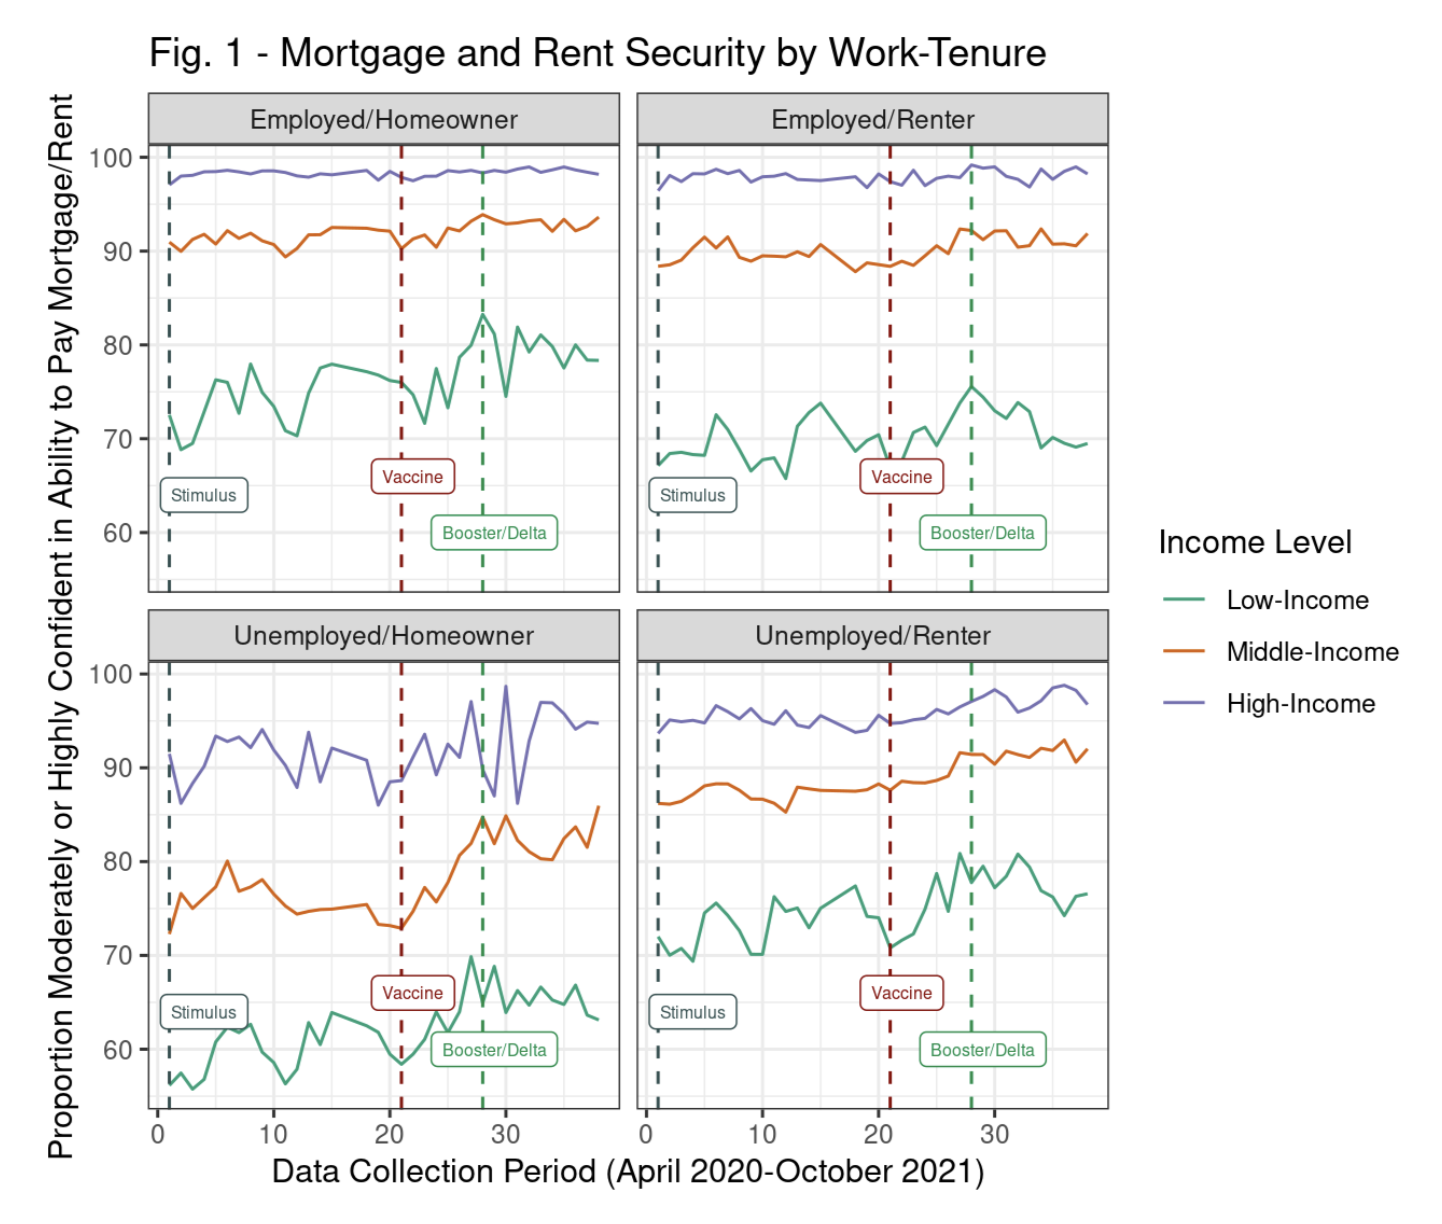 Mortgage and Rent Security